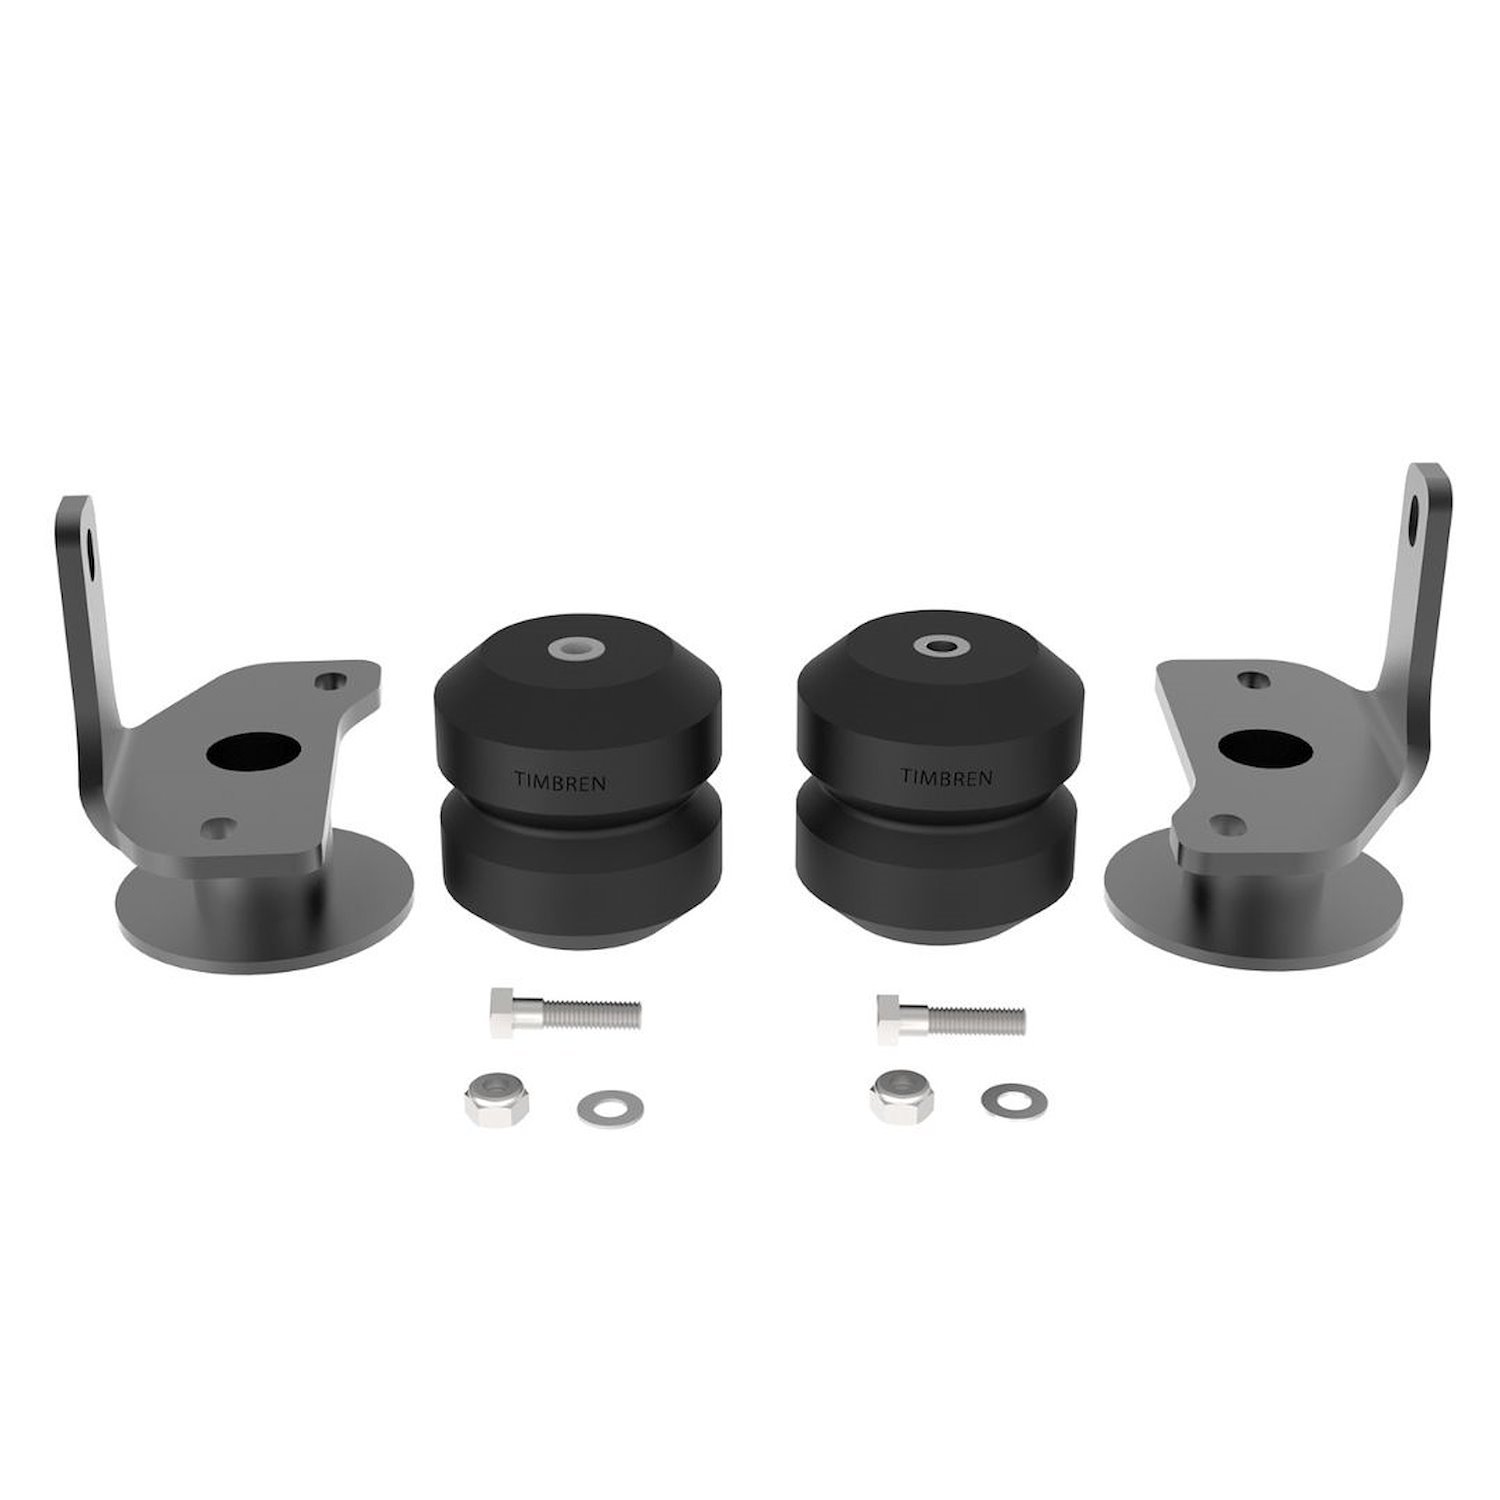 TORTNDR SES Suspension Enhancement System for Select Toyota Tundra Timbren, Rear Kit [Rated Capacity: 6000 lbs.]